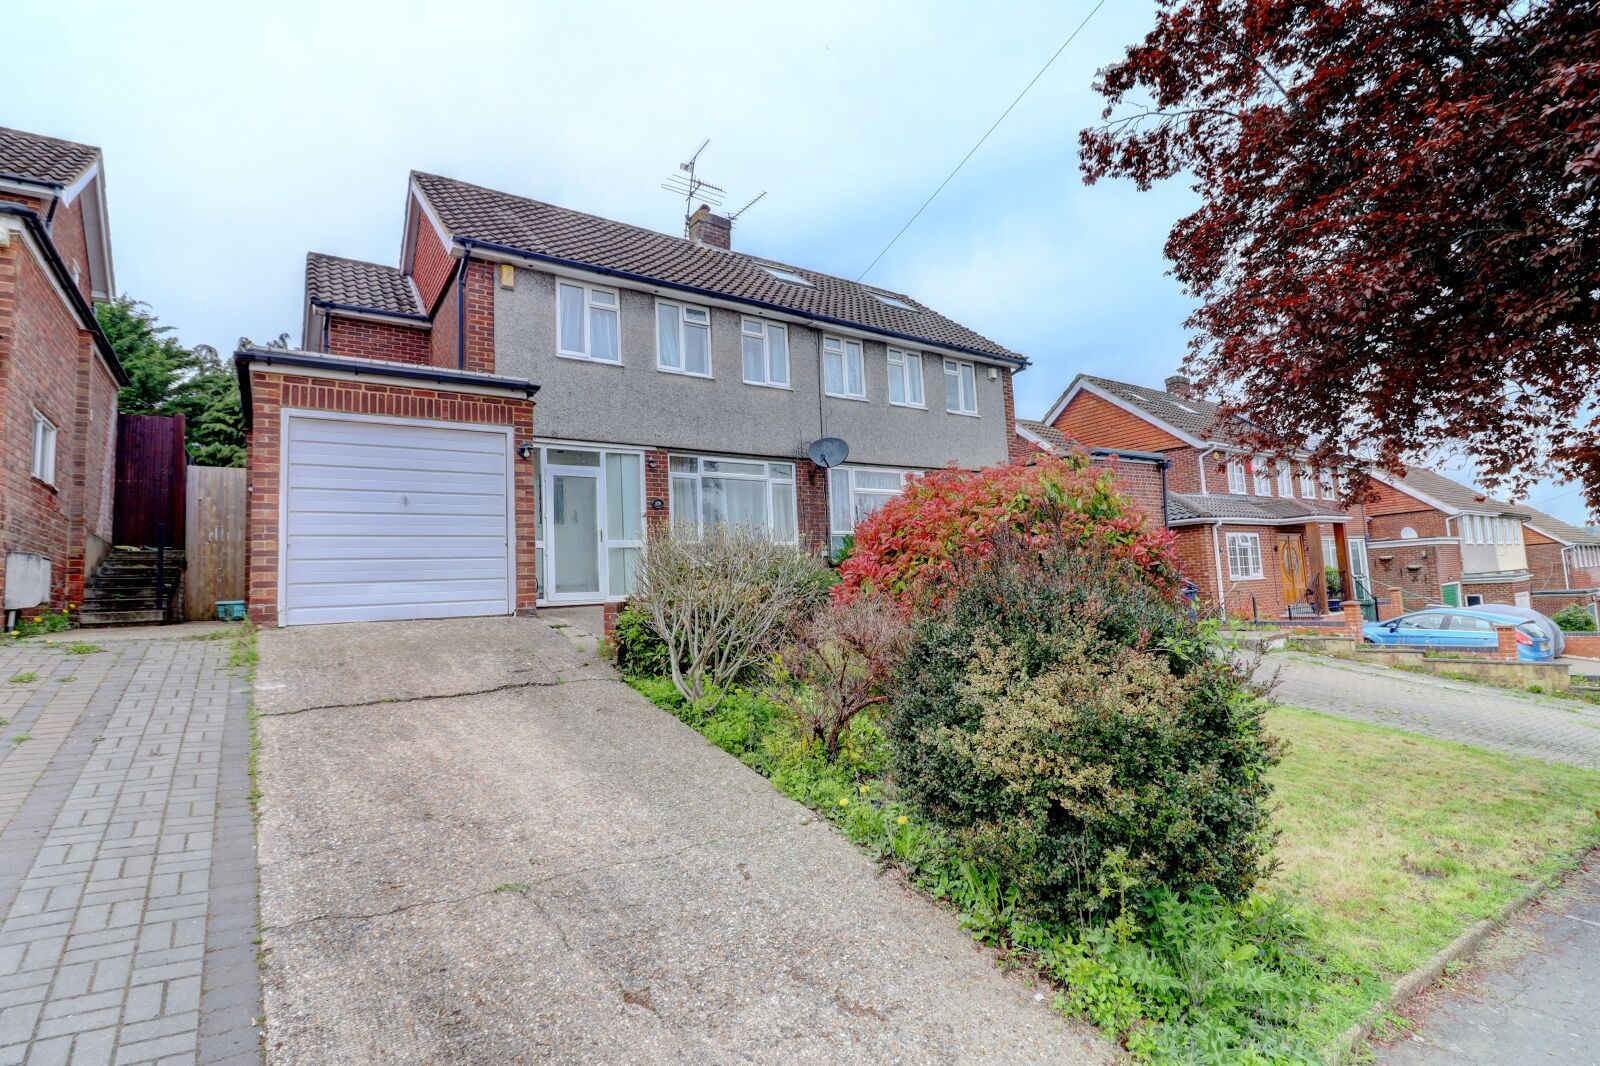 3 bedroom semi detached house for sale Deeds Grove, High Wycombe, HP12, main image